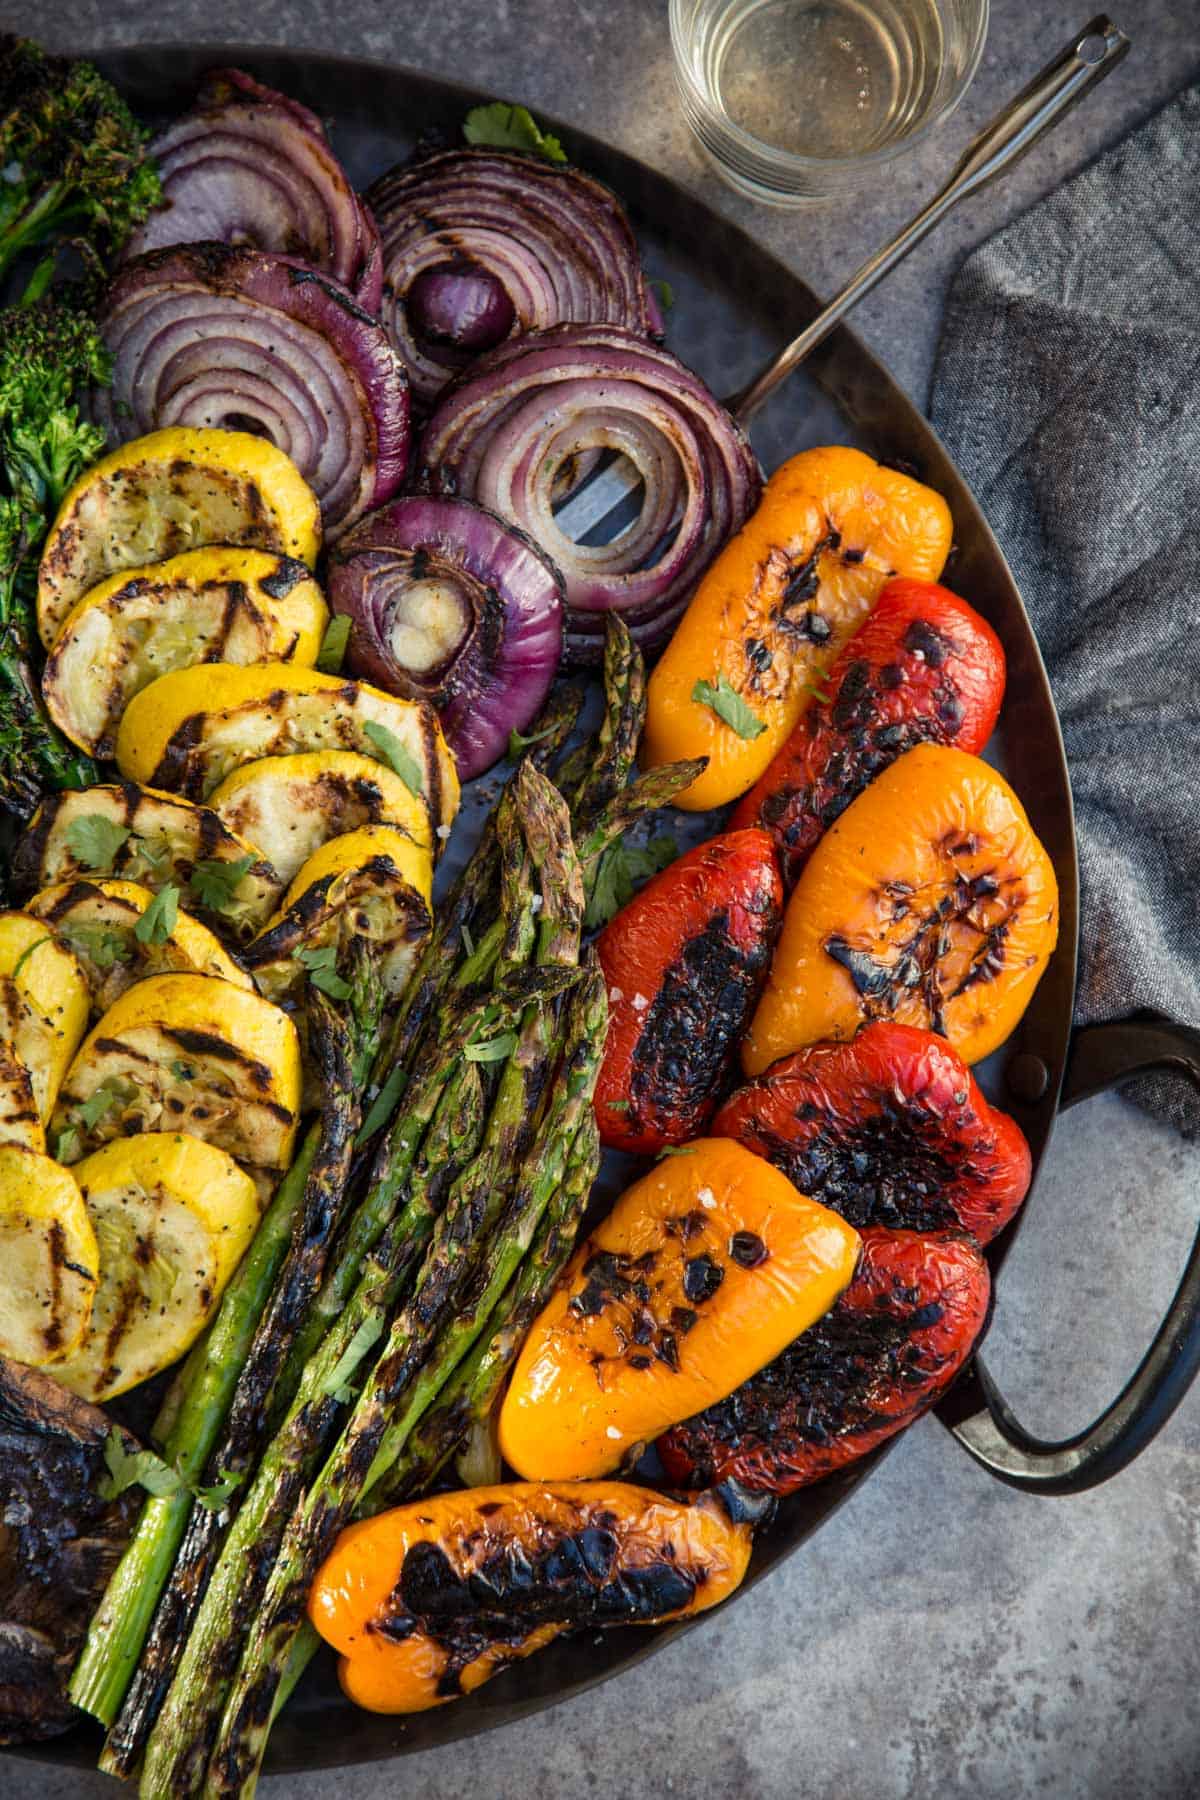 A platter of vegetarian and vegan BBQ side dishes